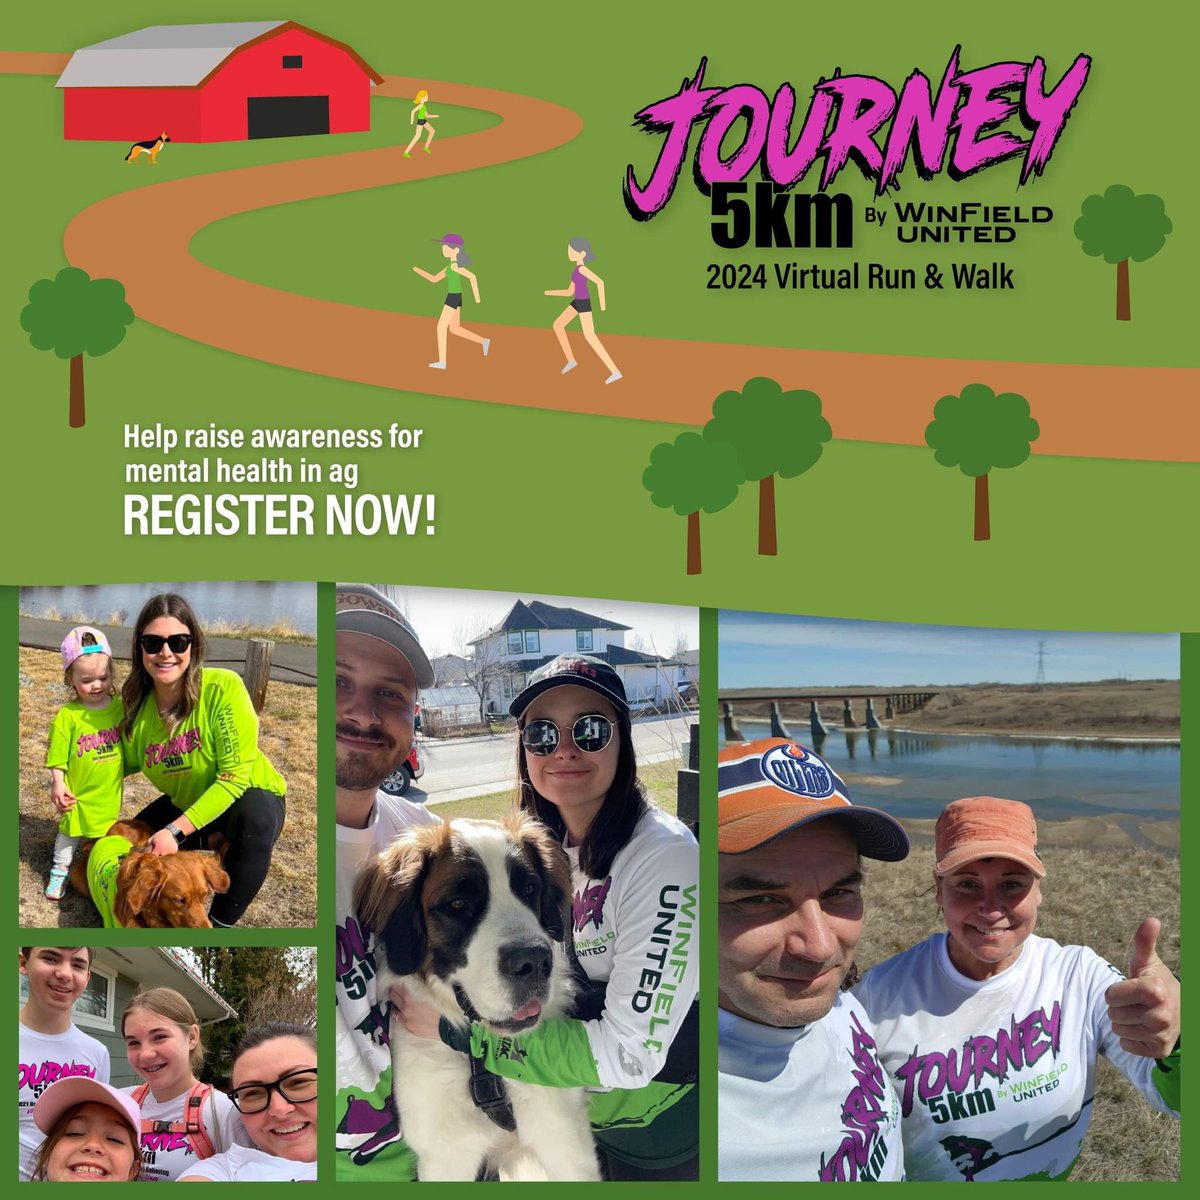 I have started at @SeCan Team for the #WinfieldJourneyForAg click link below to learn more & join my team for prizes, motivation & raise $ for @domoreag & mental health in Ag. Do NOT need to be an avid runner winfieldunited.ca/en/community/j…